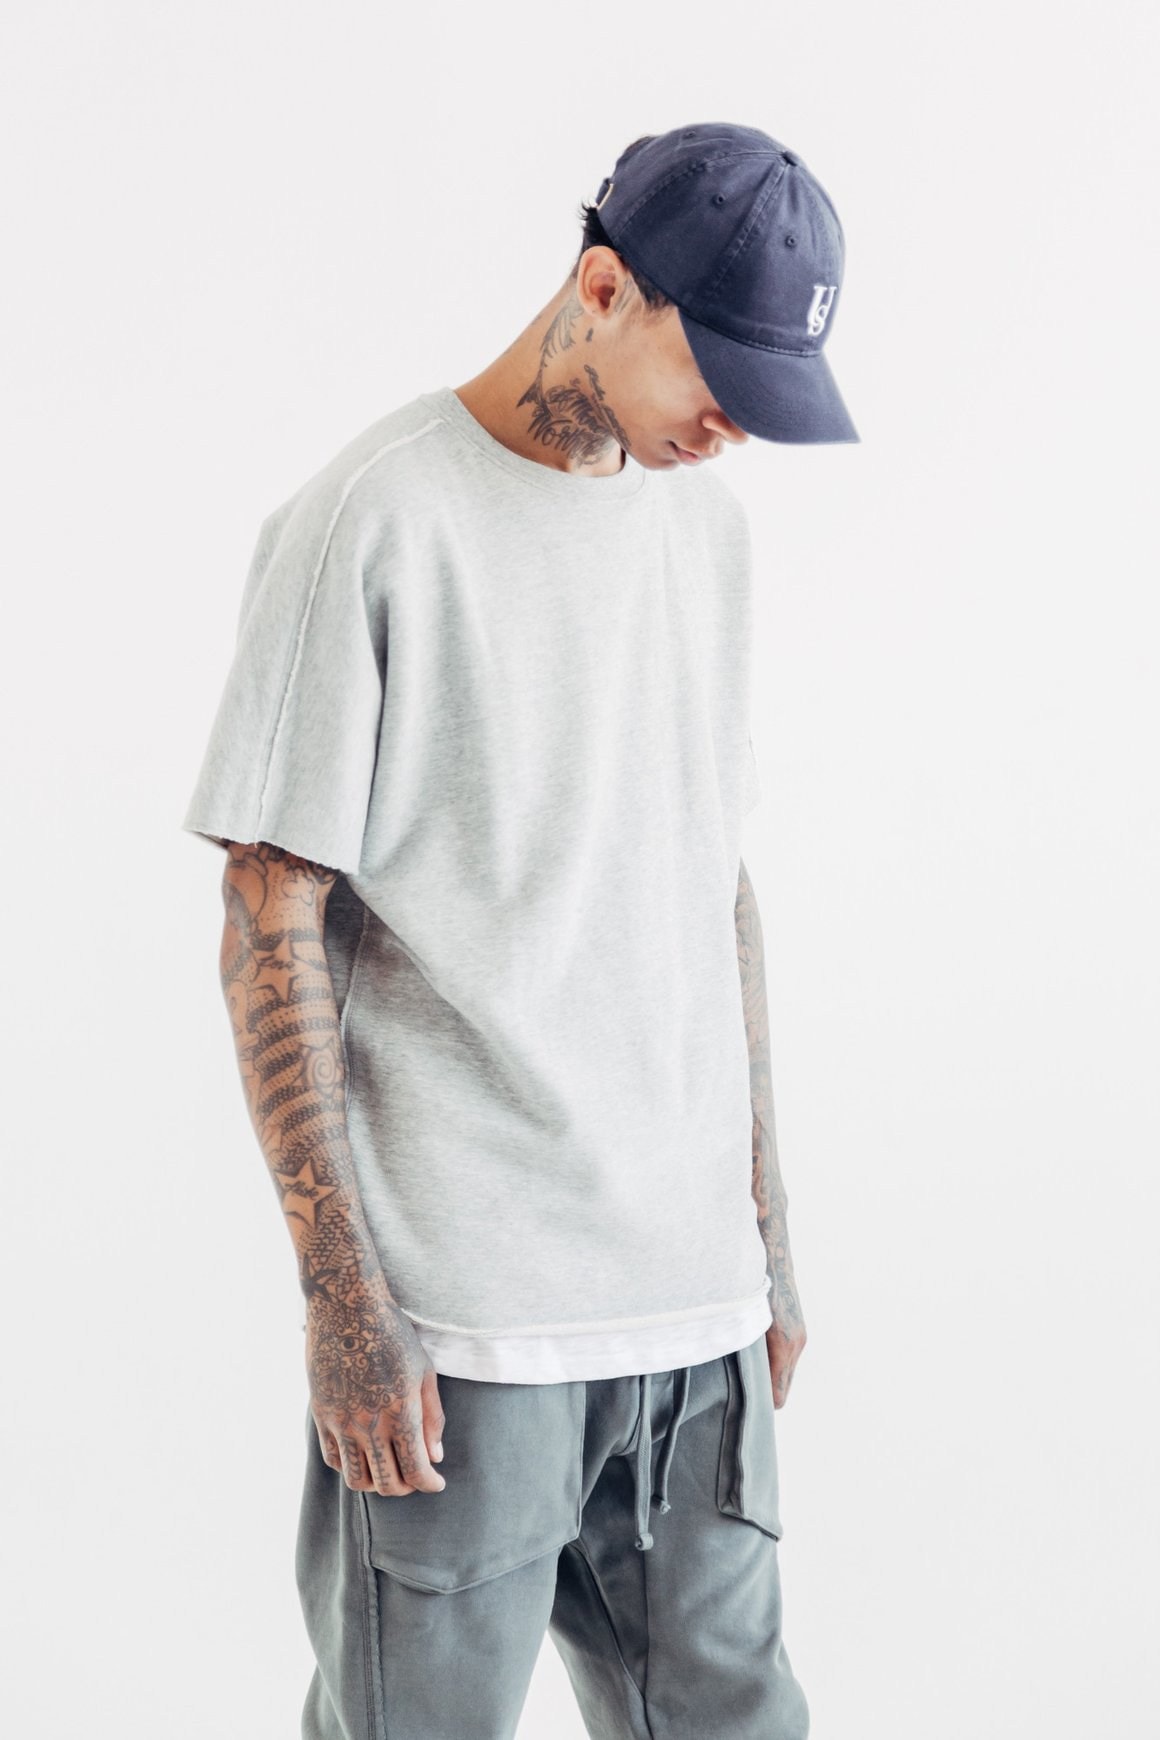 kith 2017 spring second delivery